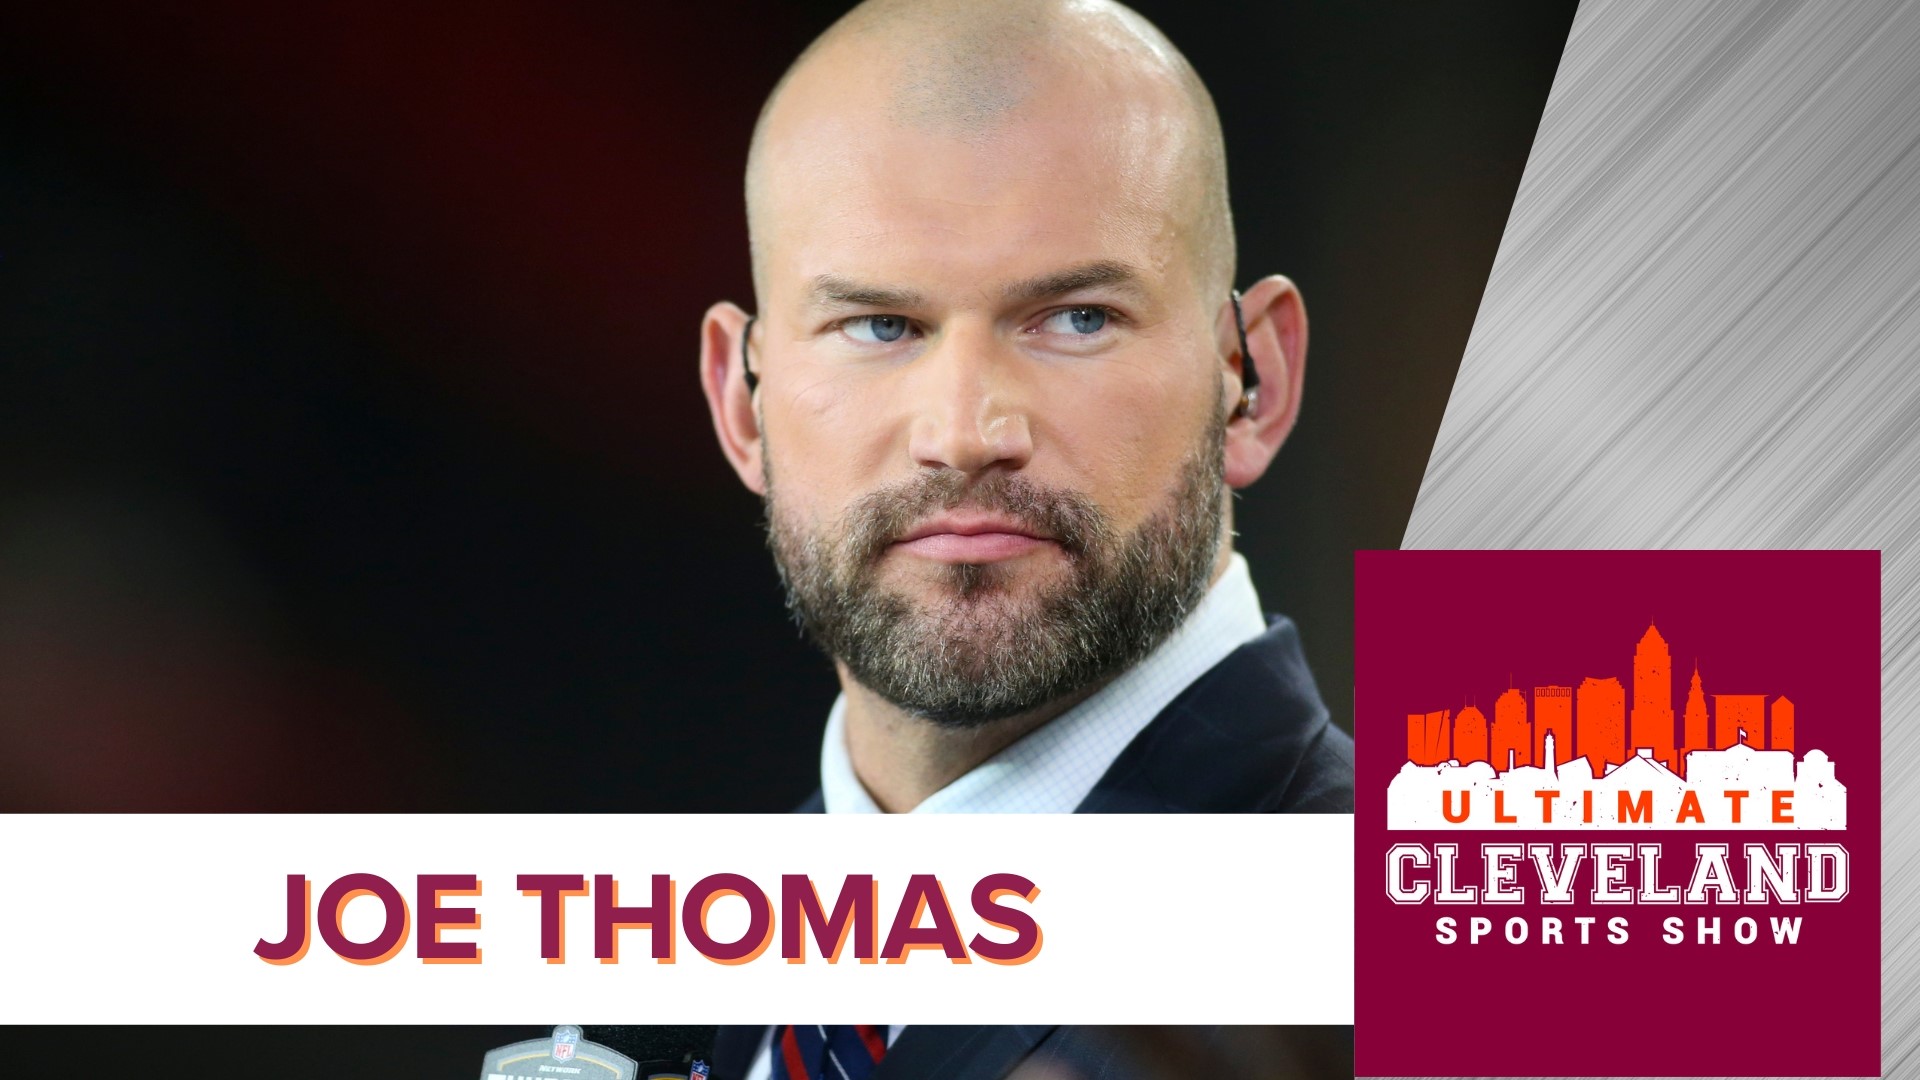 Legendary NFL lineman Joe Thomas joins the UCSS crew, talking Baker Mayfield, taking the Browns to the top and his favorite type of cheese.